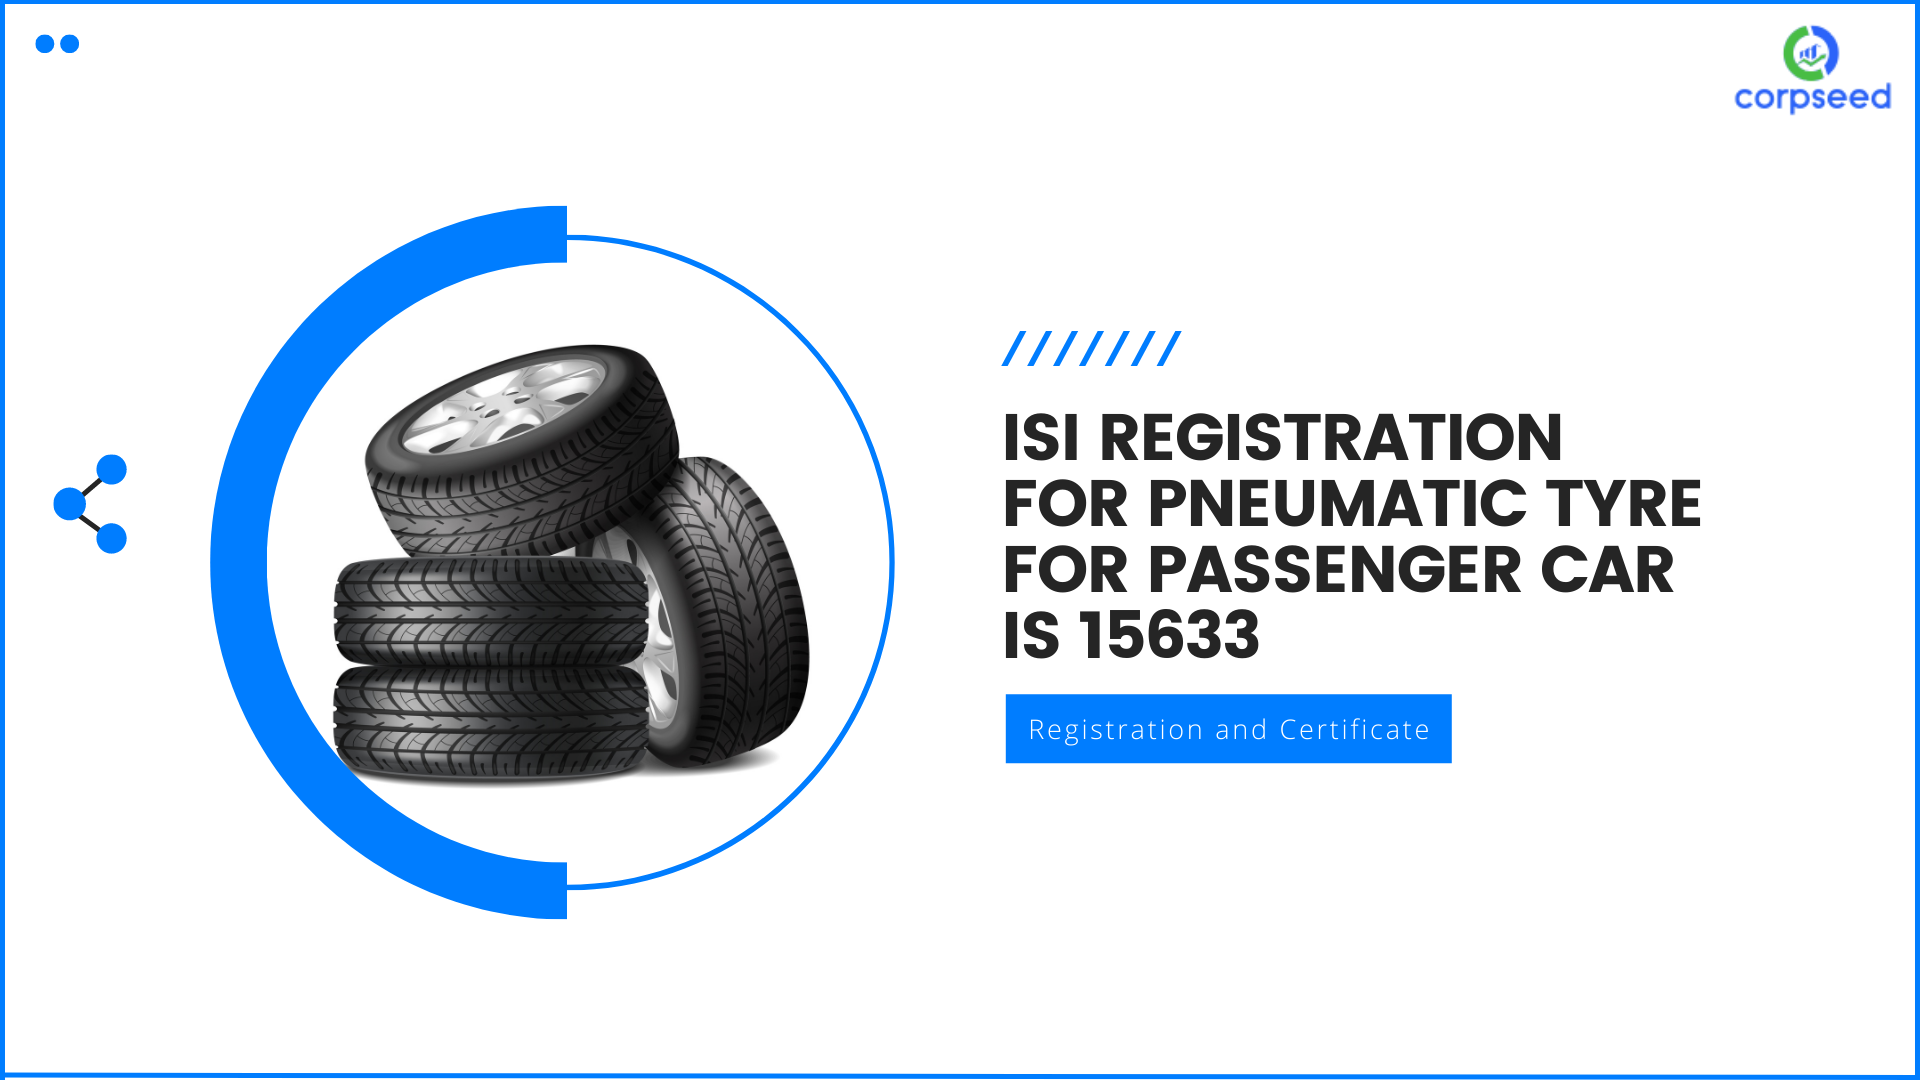 isi-registration-for-pneumatic-tyre-for-passenger-car-is-15633-corpseed.png